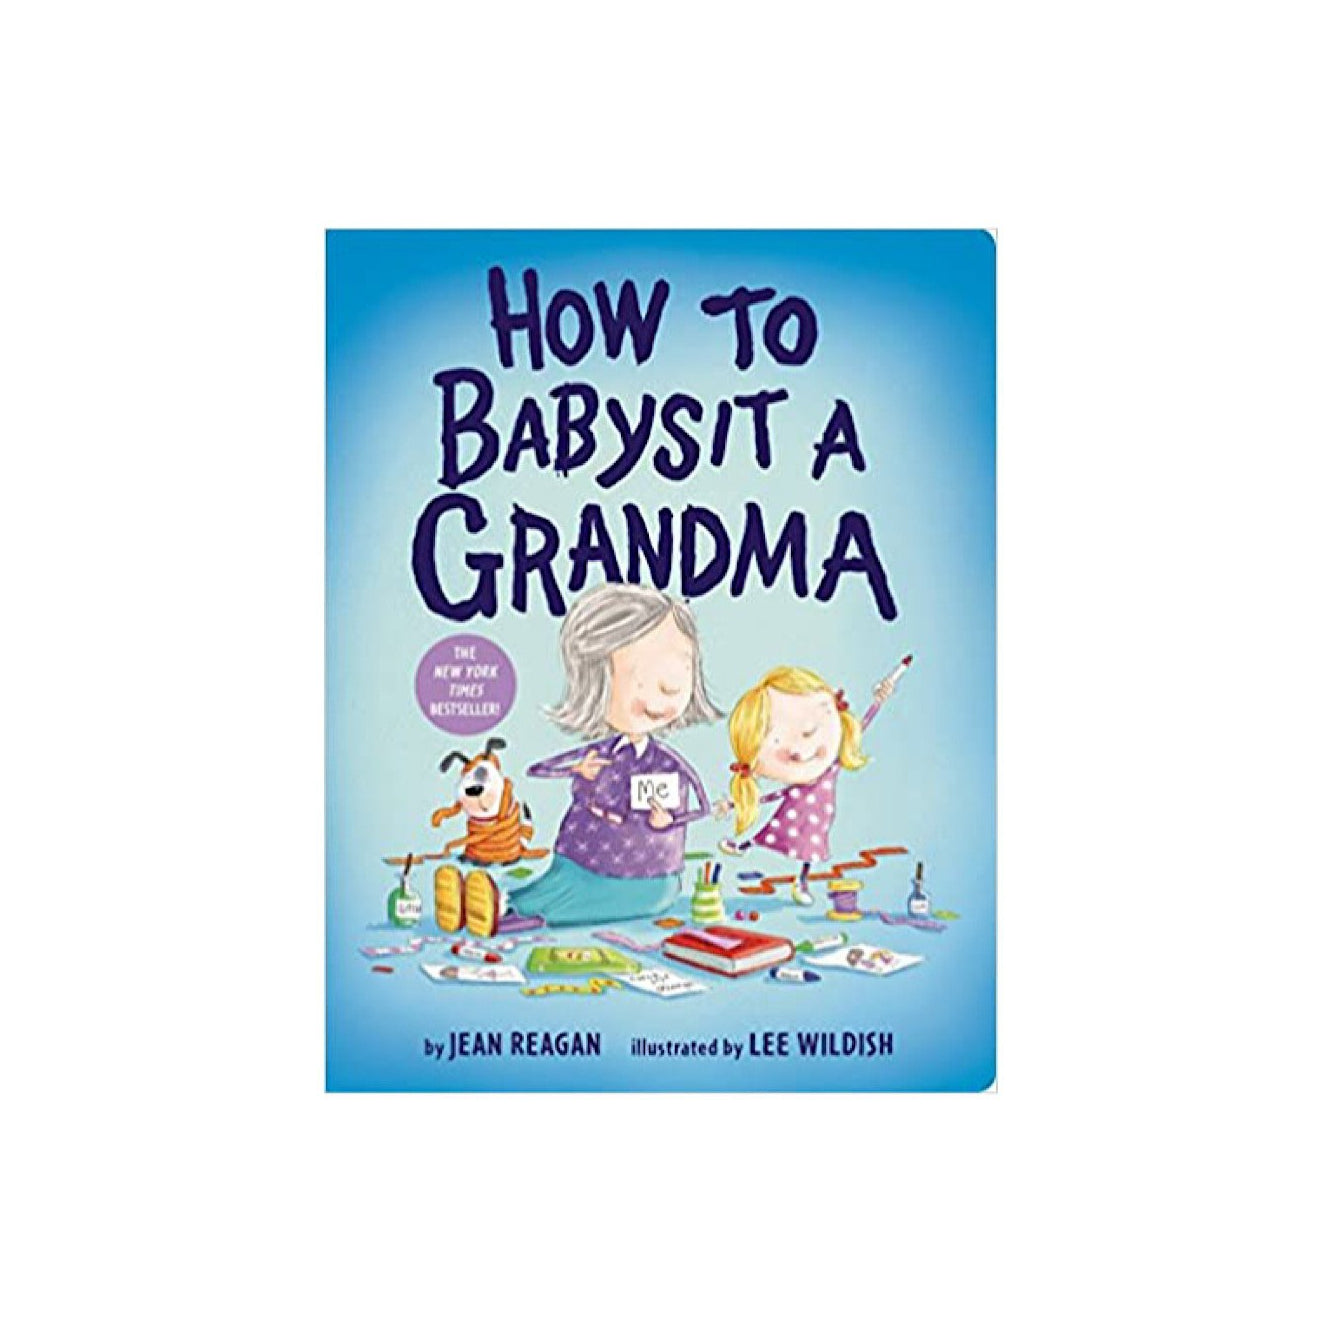 How To Babysit A Grandma